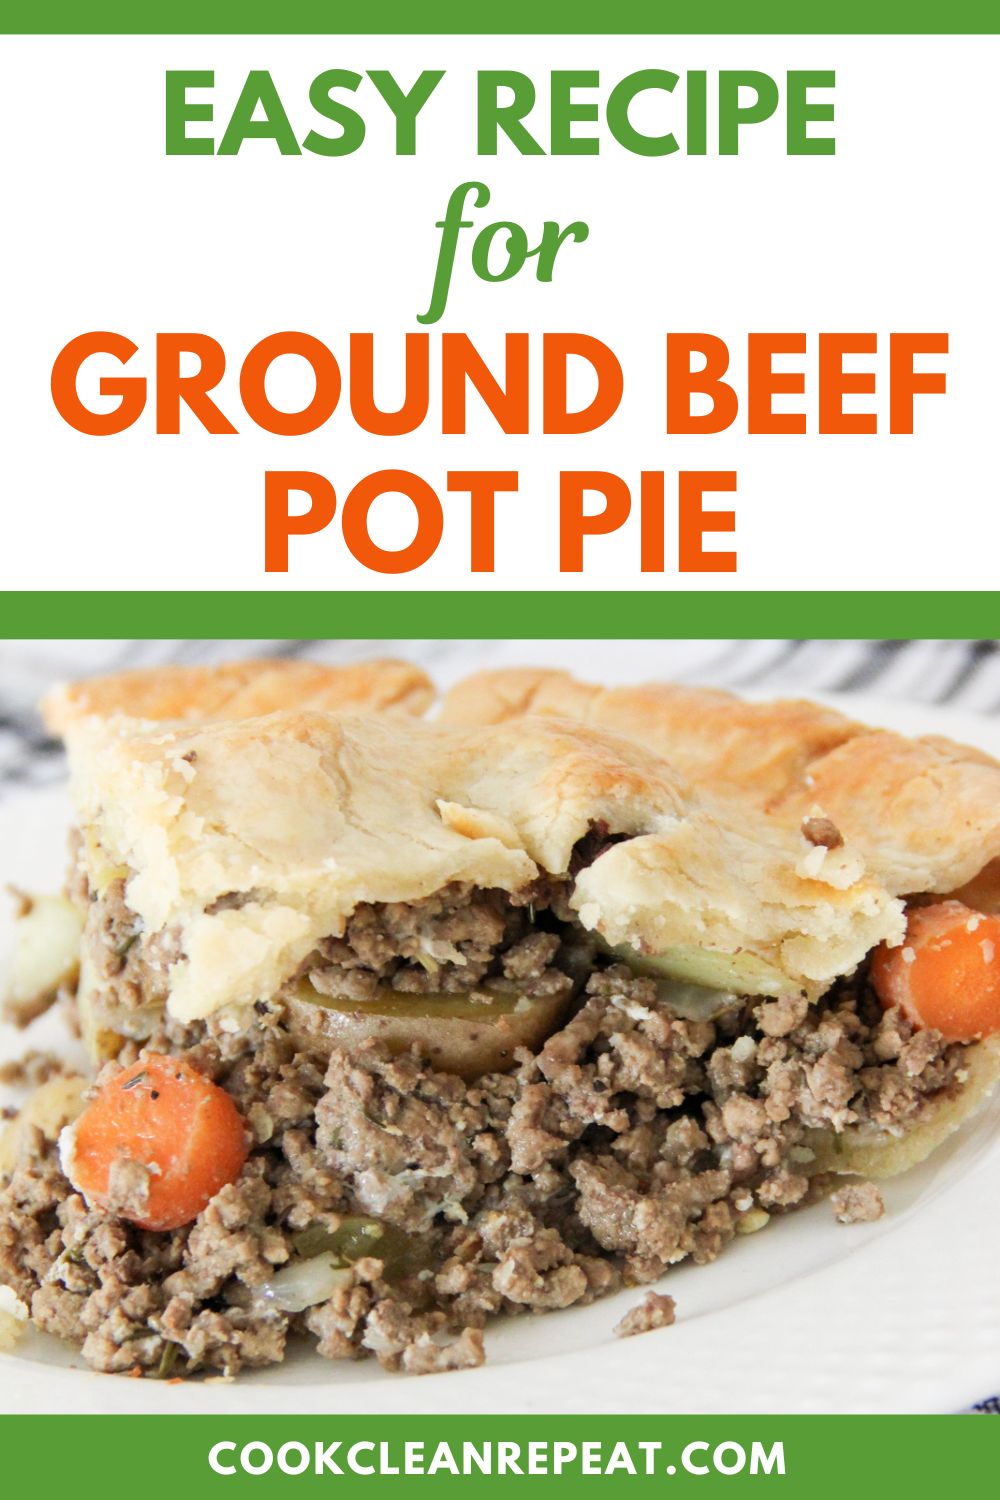 Pinterest image for an easy ground beef pot pie recipe